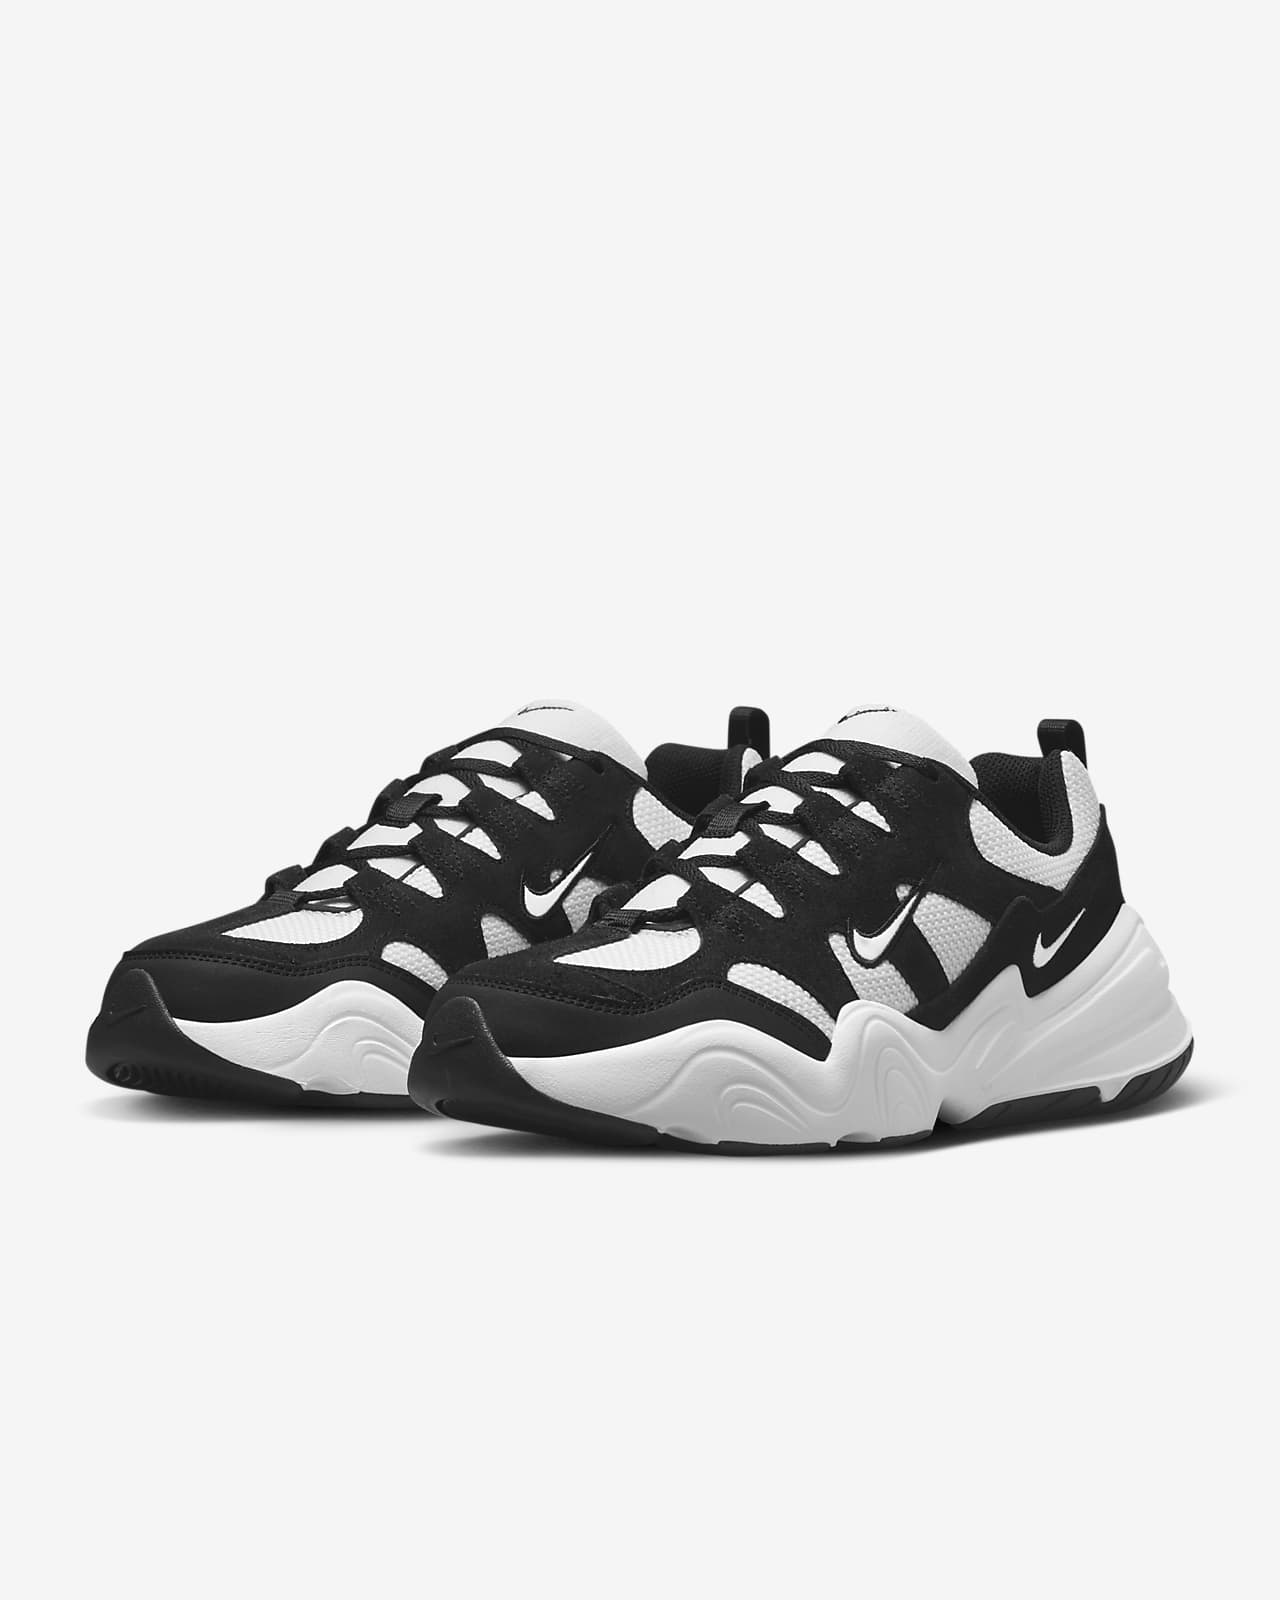 Nike Shoes for Regular Use | Nike Air Max Bella TR 5 Women’s Workout Shoes | 80s Nike Shoes Women’s